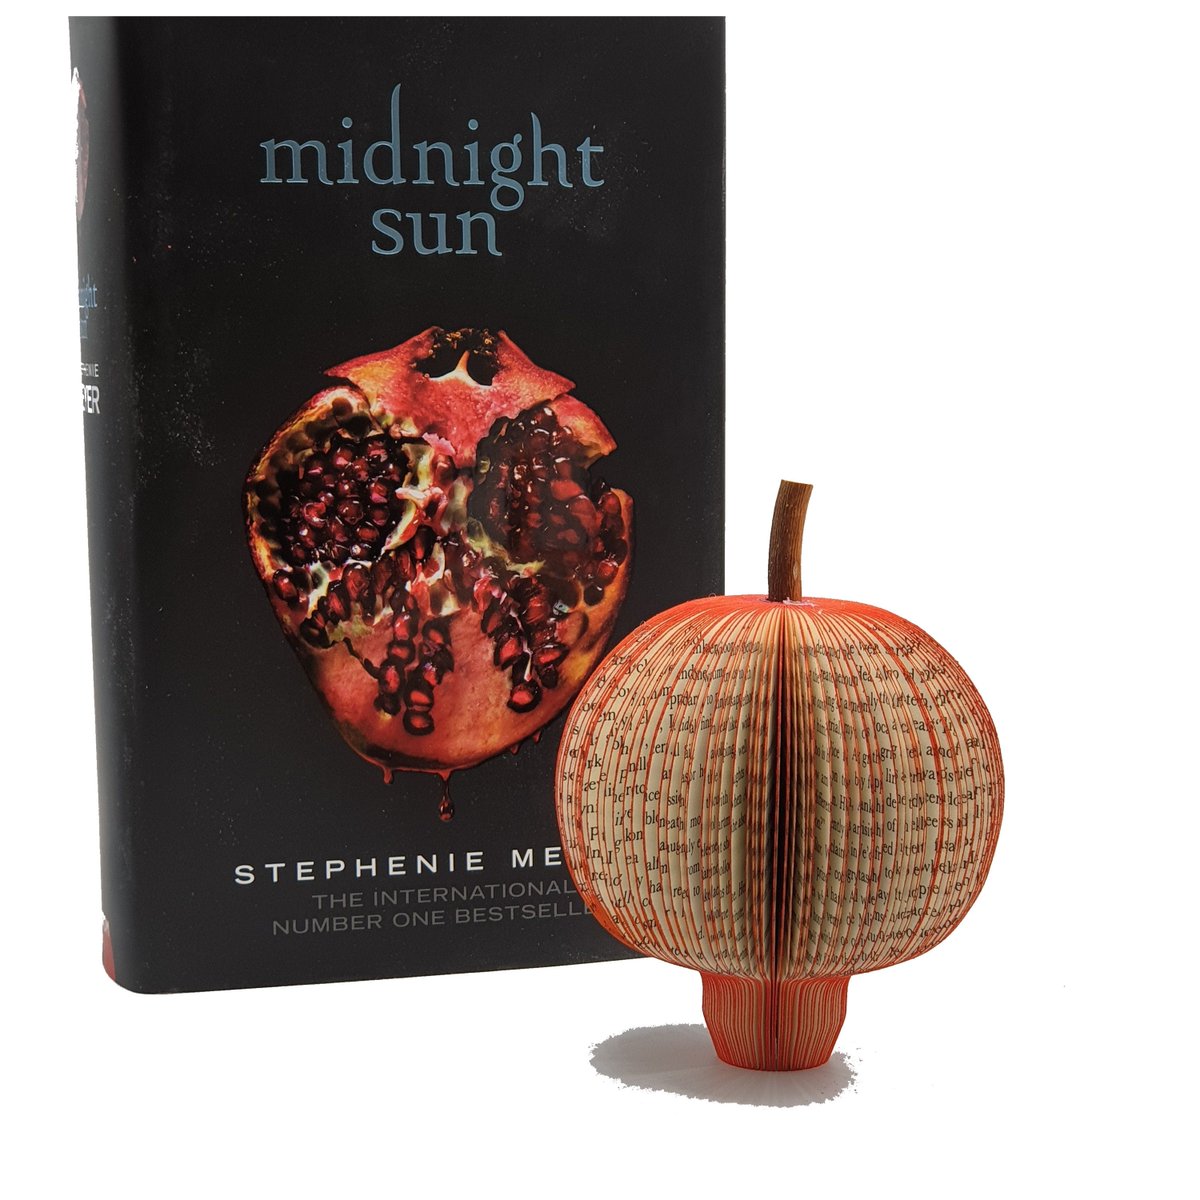 Midnight Sun Pomegranate Book Gift creatoncrafts.com/products/perso… #mhhsbd #Shopify #CreatonCrafts #3dPaperSculpture